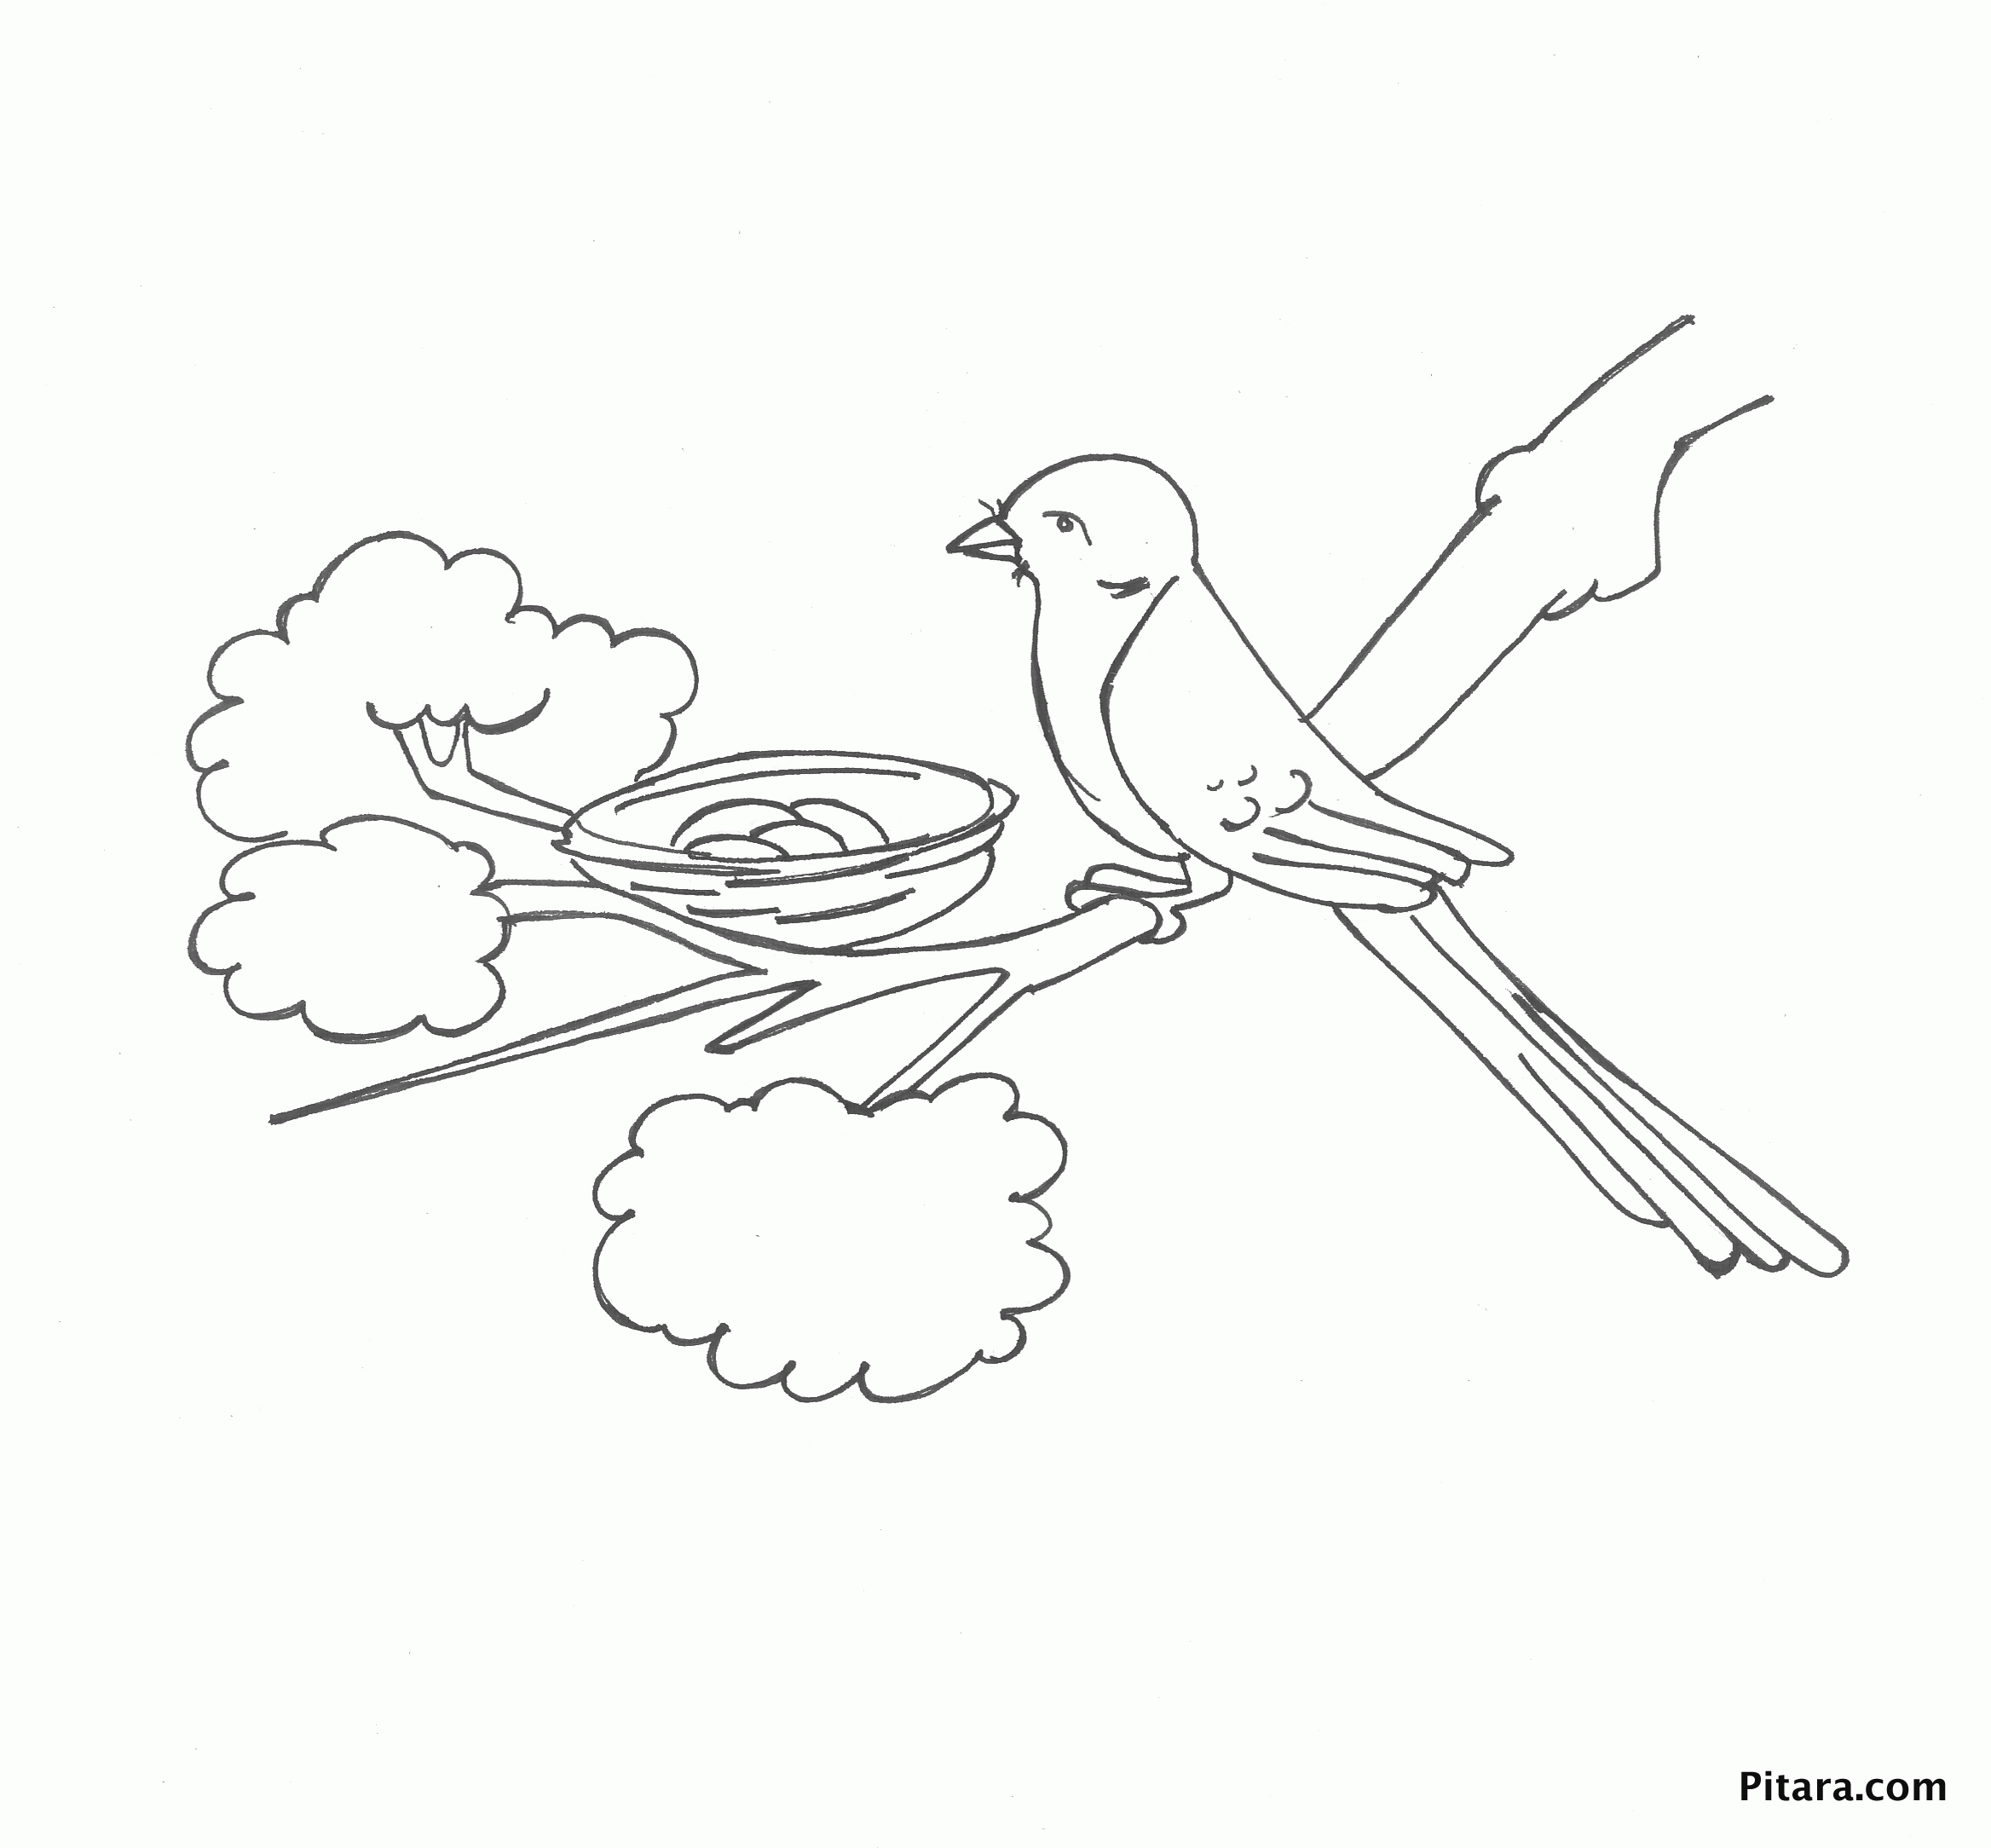 Bird in the nest – Coloring page | Pitara Kids Network